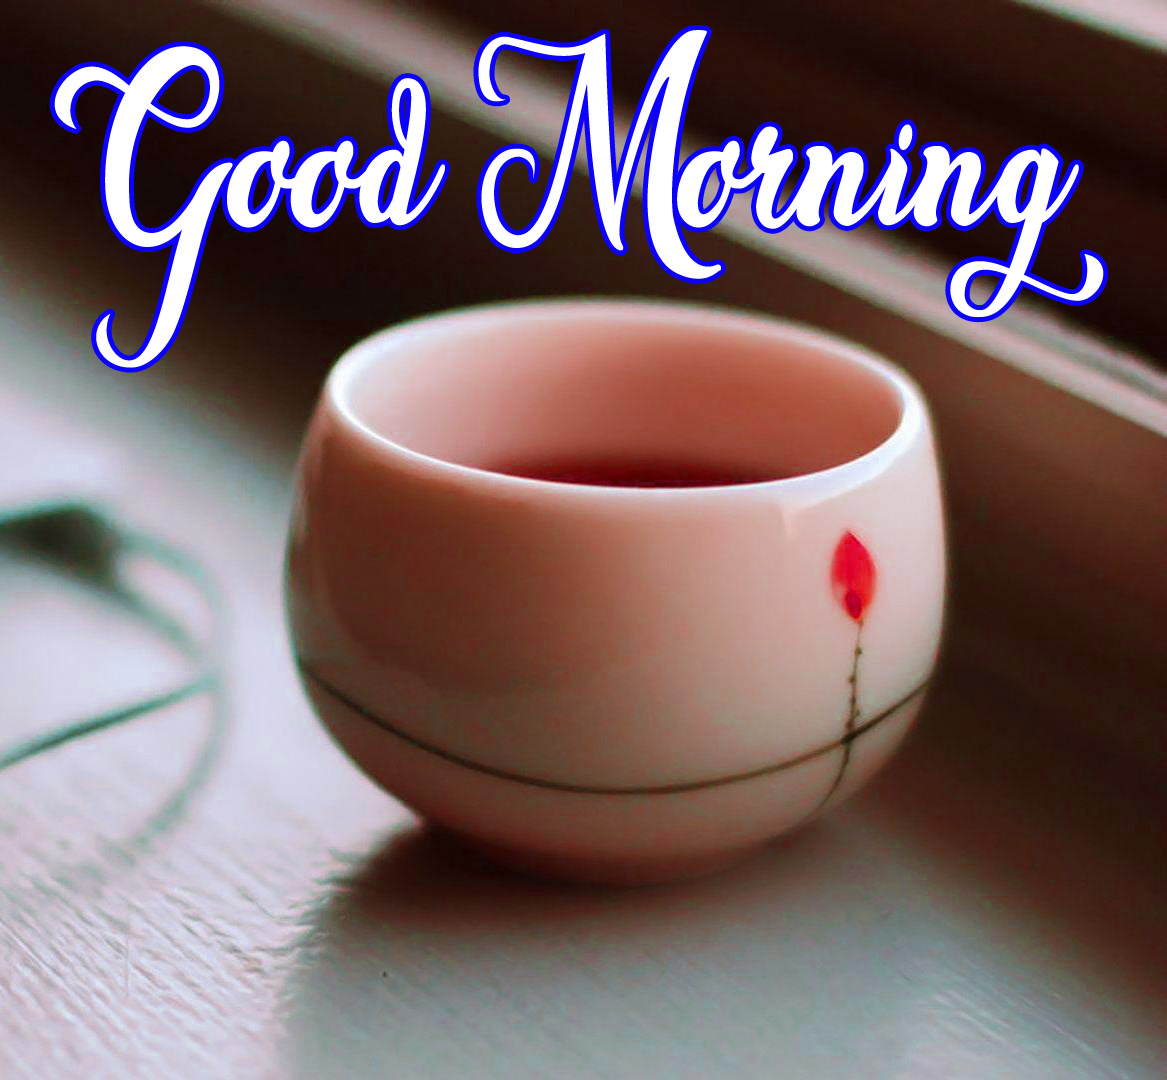 Latest 1080p High Quality Good Morning Pics photo Download 